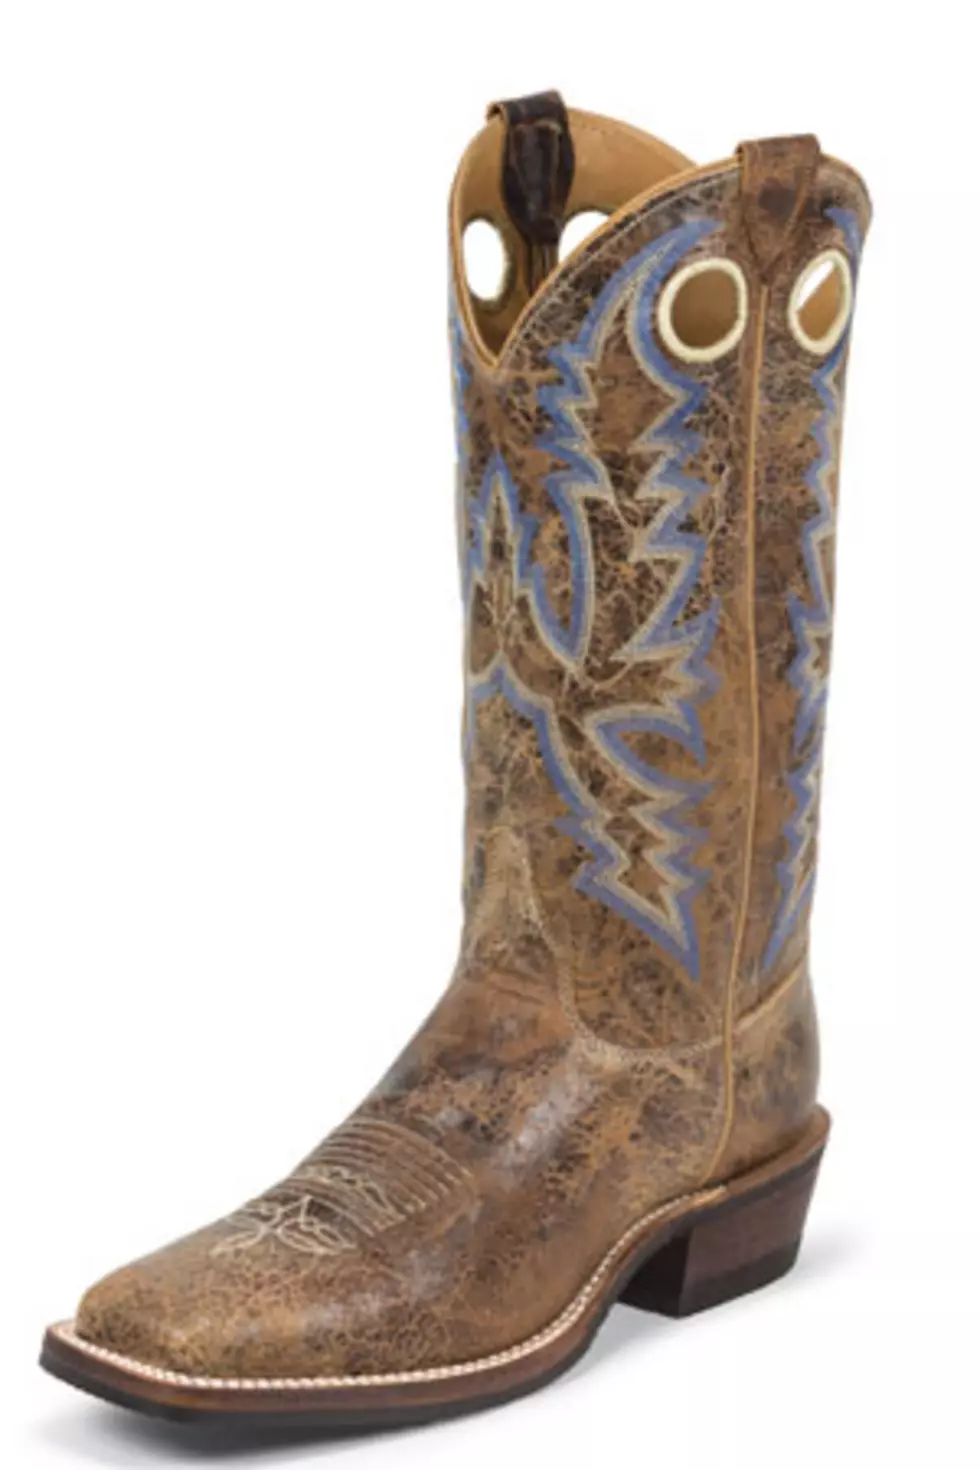 Win a Pair of Justin Boots and Others Prizes From the Josh Abbott Band